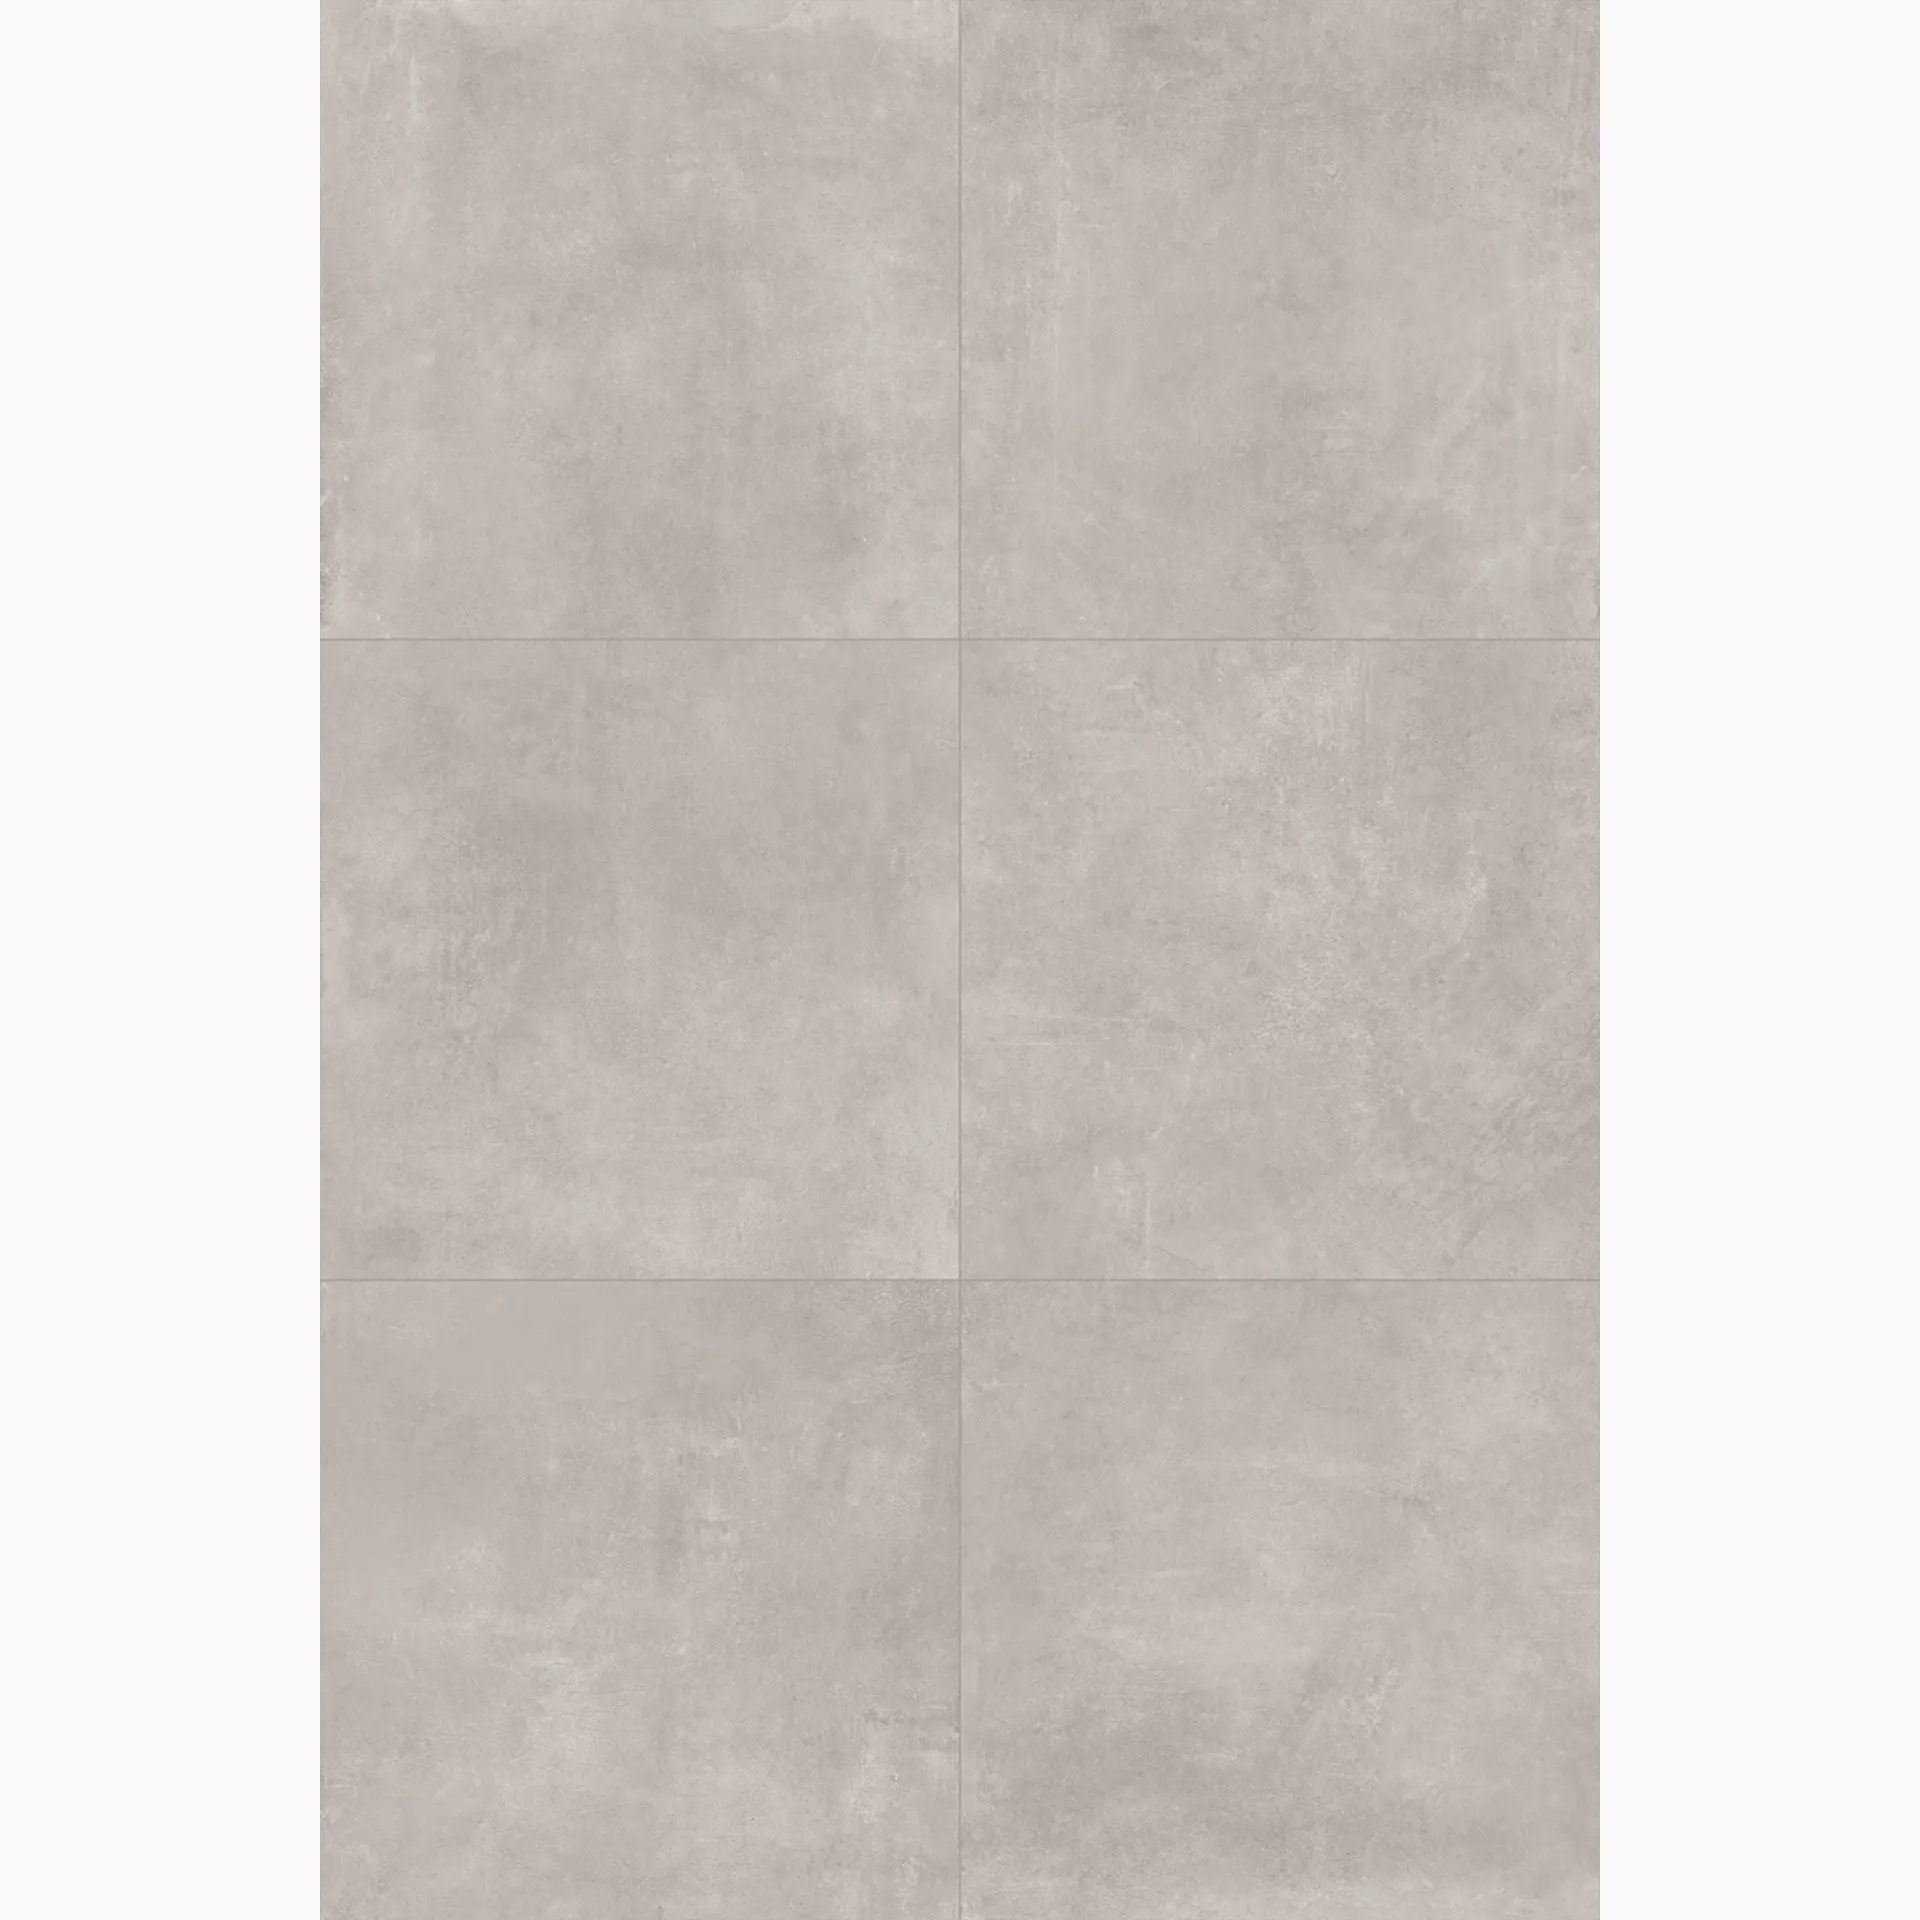 Mirage Glocal Gc 02 Perfect Naturale TF92 60x60cm rectified 9mm